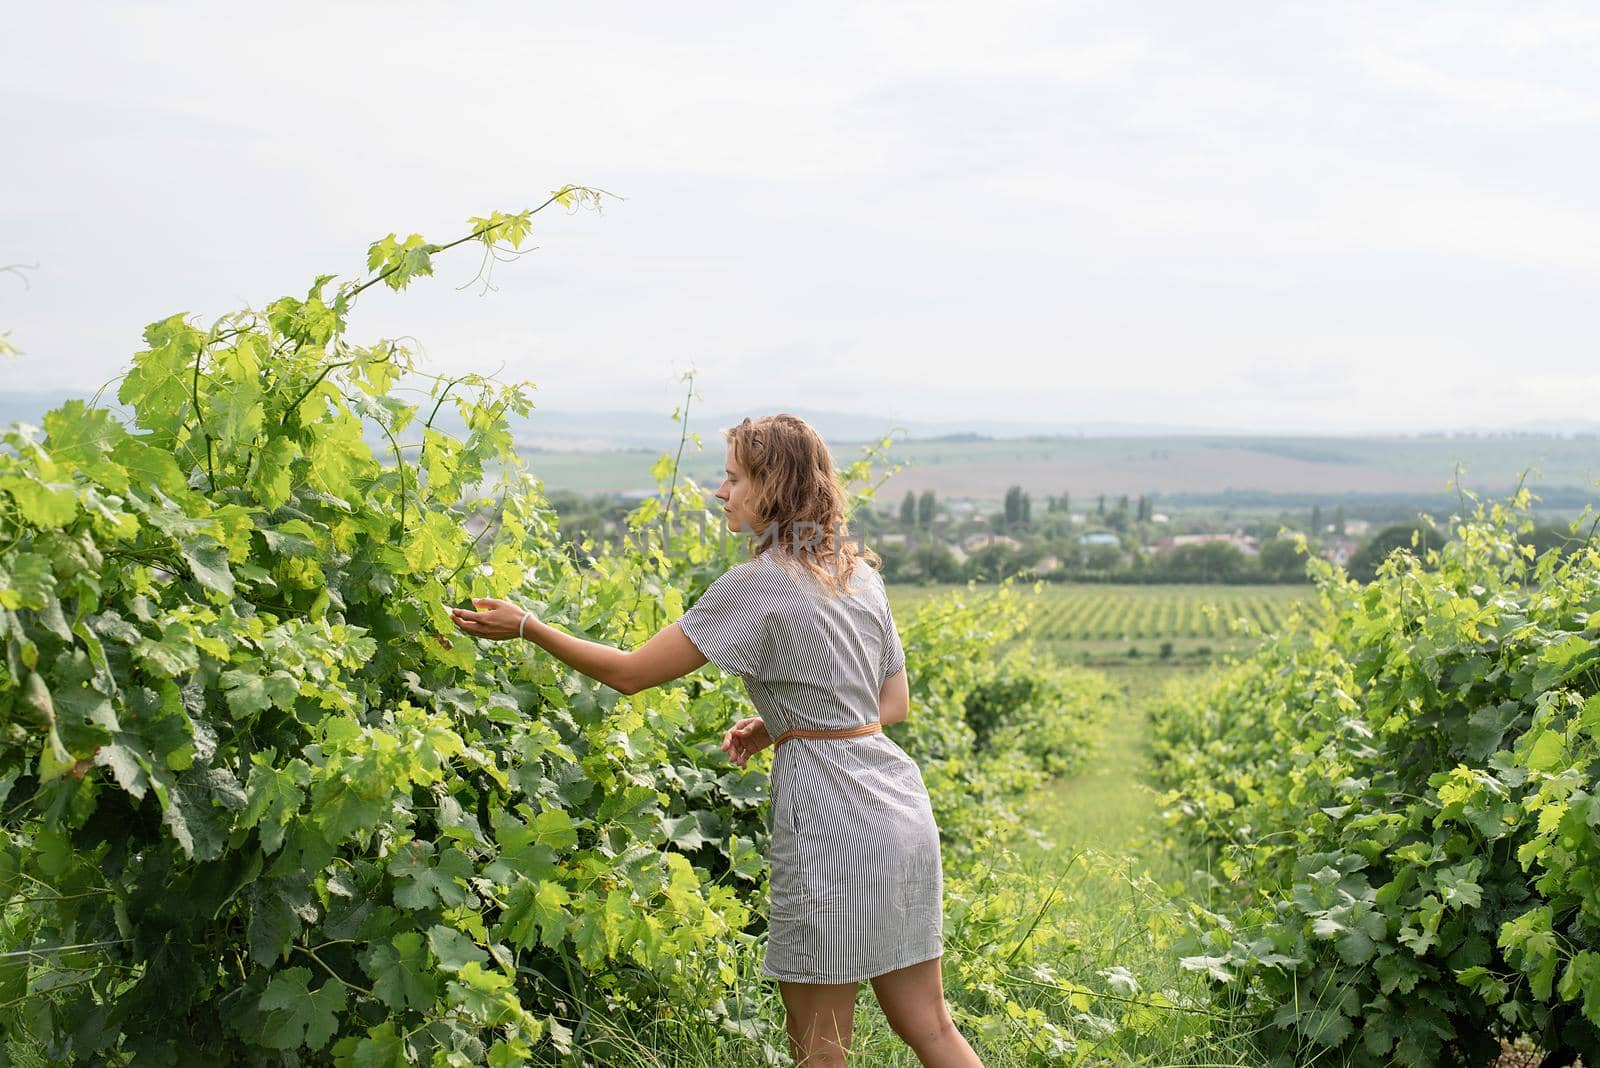 woman in summer dress walking through the vineyard smelling the grapes